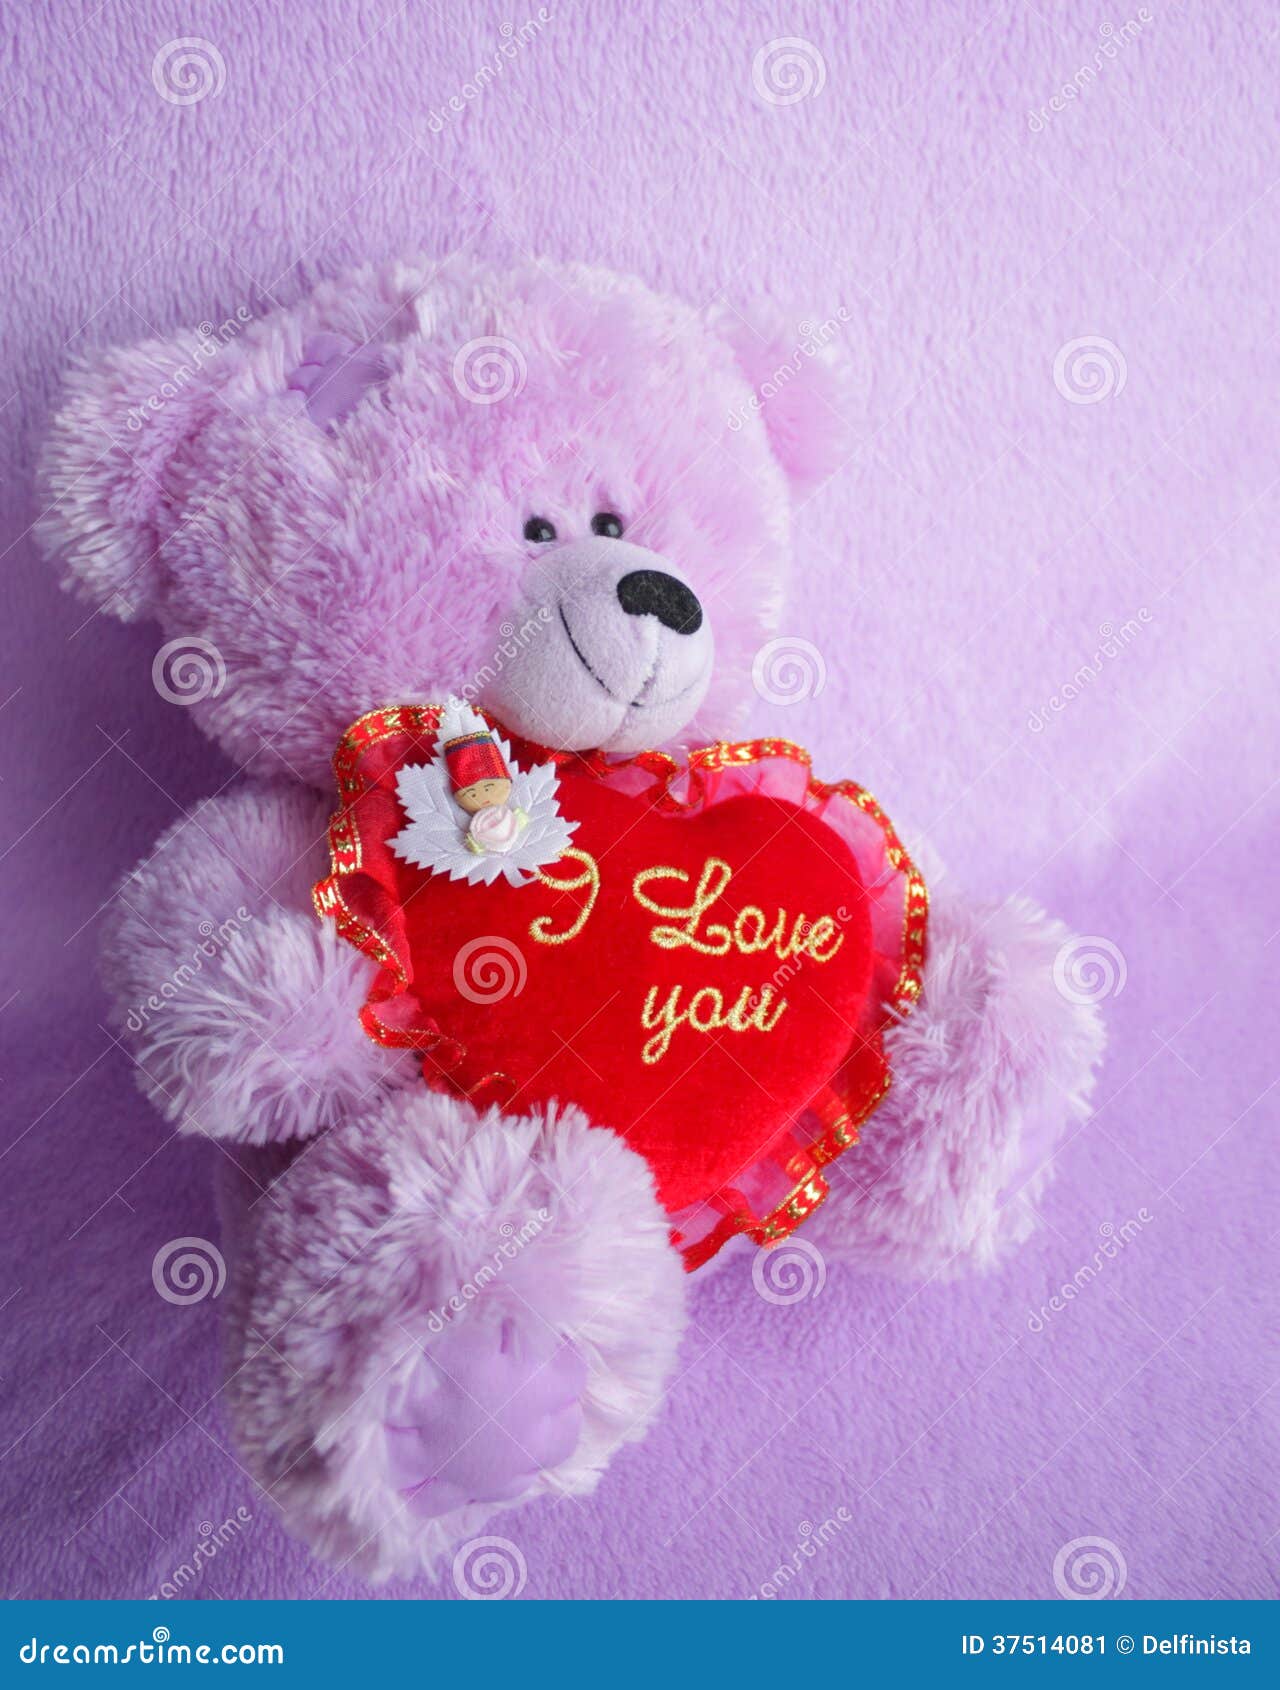 Teddy Bear and Red Heart I Love You - Stock Photos Stock Image ...